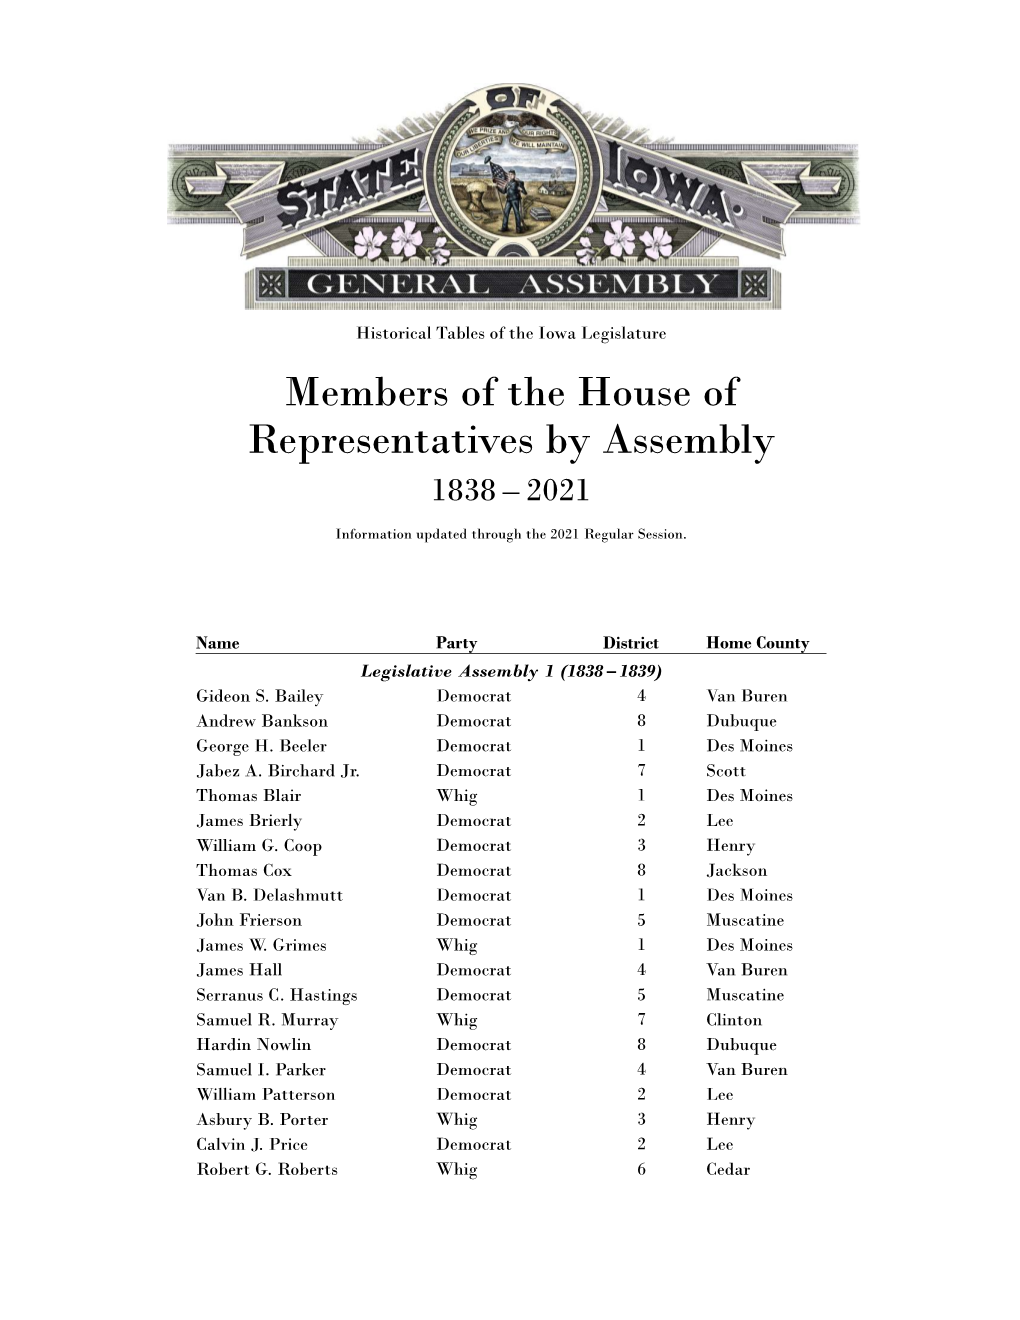 Members of the House of Representatives by Assembly 1838 – 2021